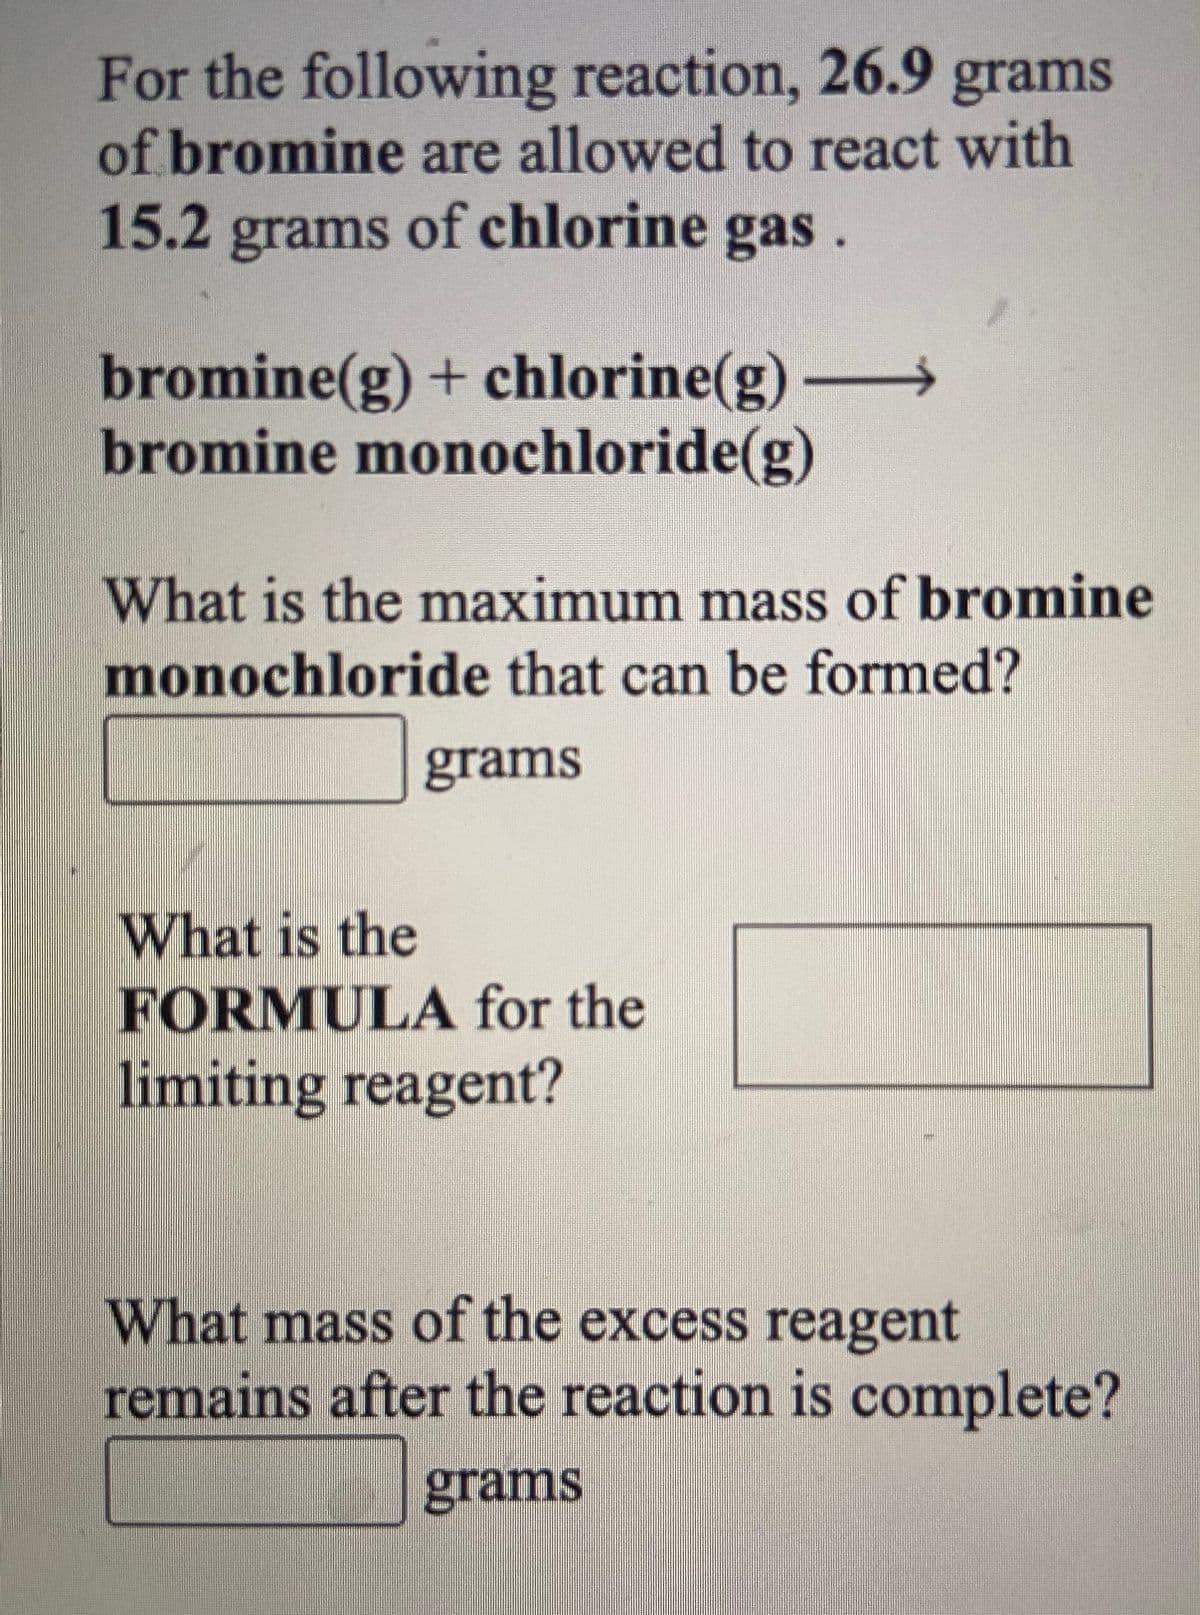 For the following reaction, 26.9 grams
of bromine are allowed to react with
15.2 grams of chlorine gas.
bromine(g)+ chlorine(g)
bromine monochloride(g)
What is the maximum mass of bromine
monochloride that can be formed?
grams
What is the
FORMULA for the
limiting reagent?
What mass of the excess reagent
remains after the reaction is complete?
grams
